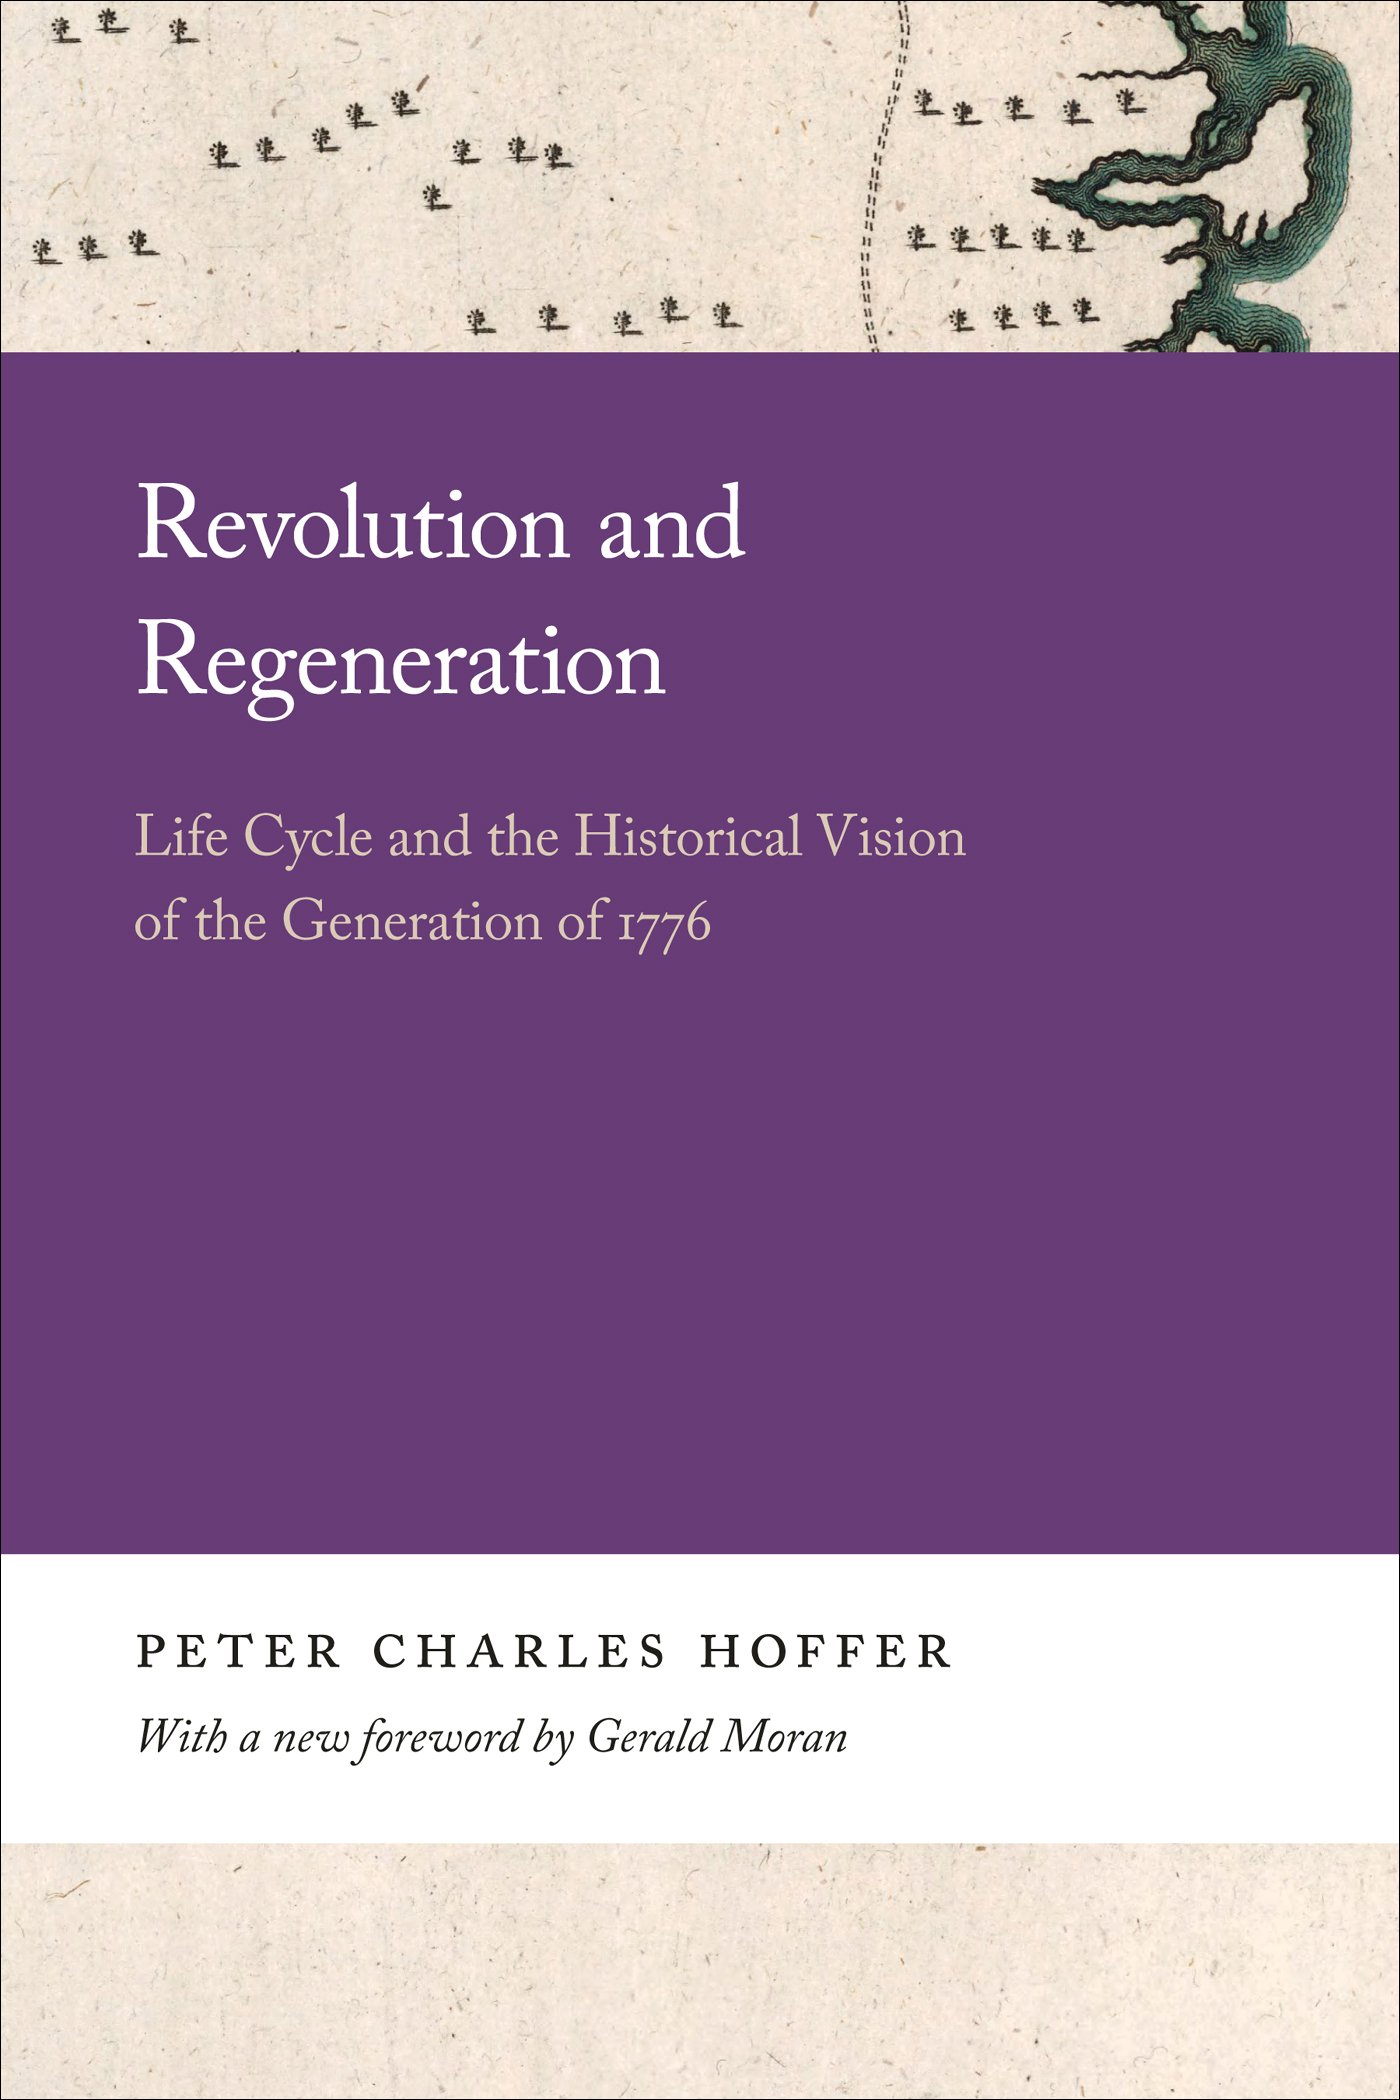 Cover page of the book “Revolution and Regeneration.”